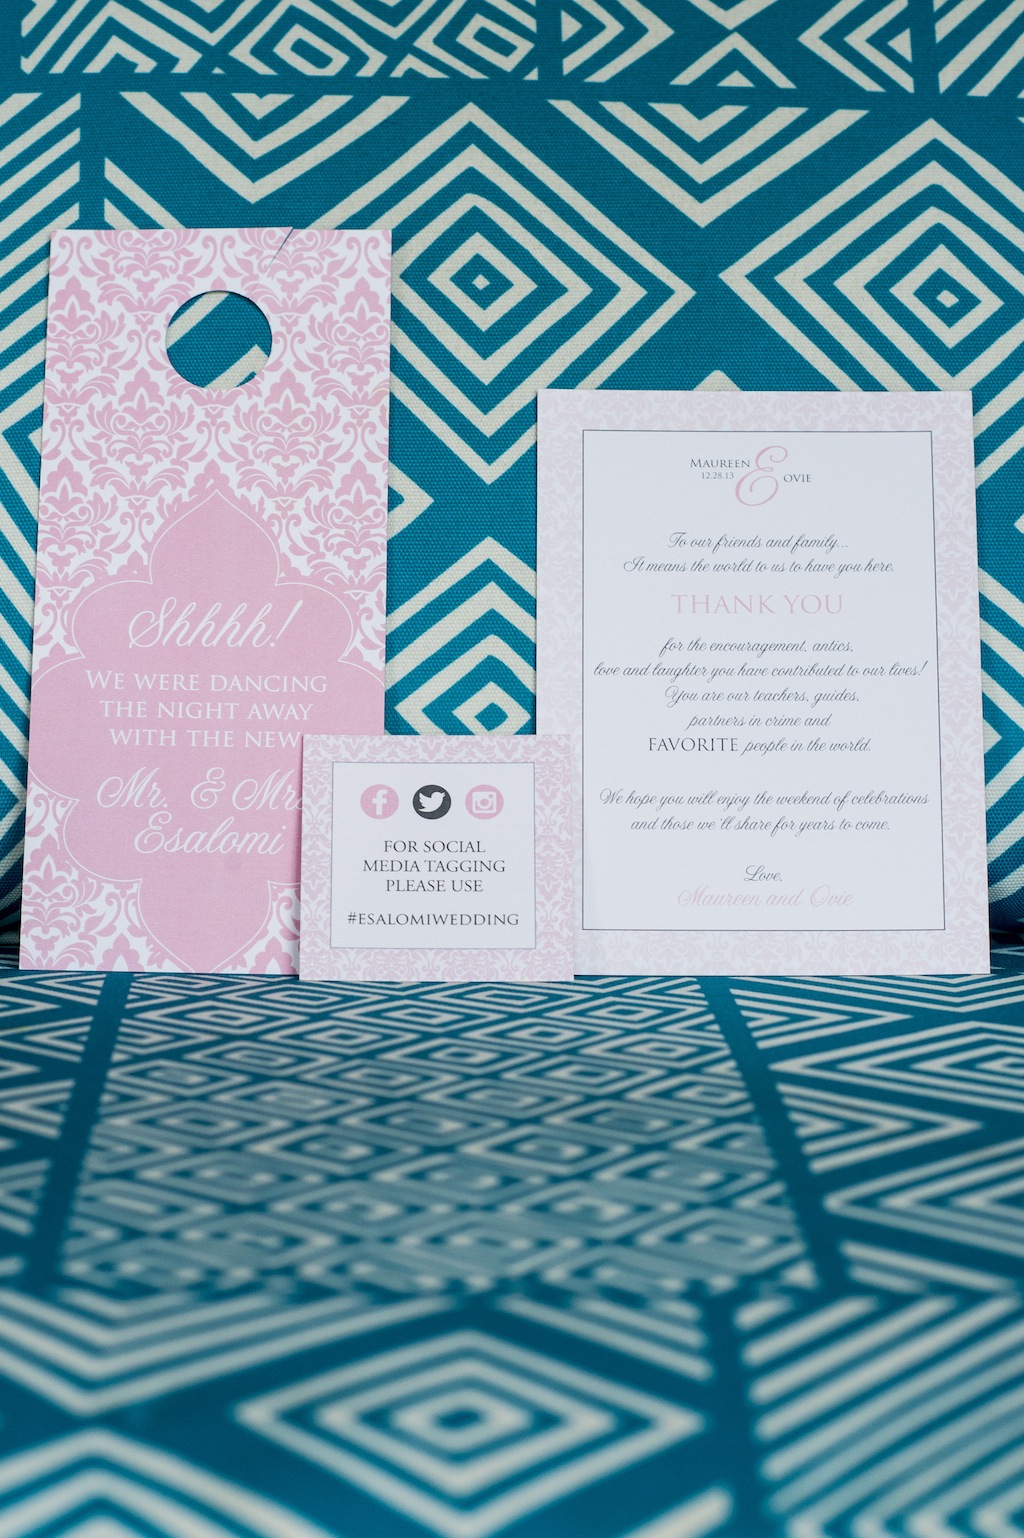 Post Card Inn Wedding St. Pete Beach - In True Colors Photography - Pink, Ivory and White Beachfront Nigerian Wedding (1)